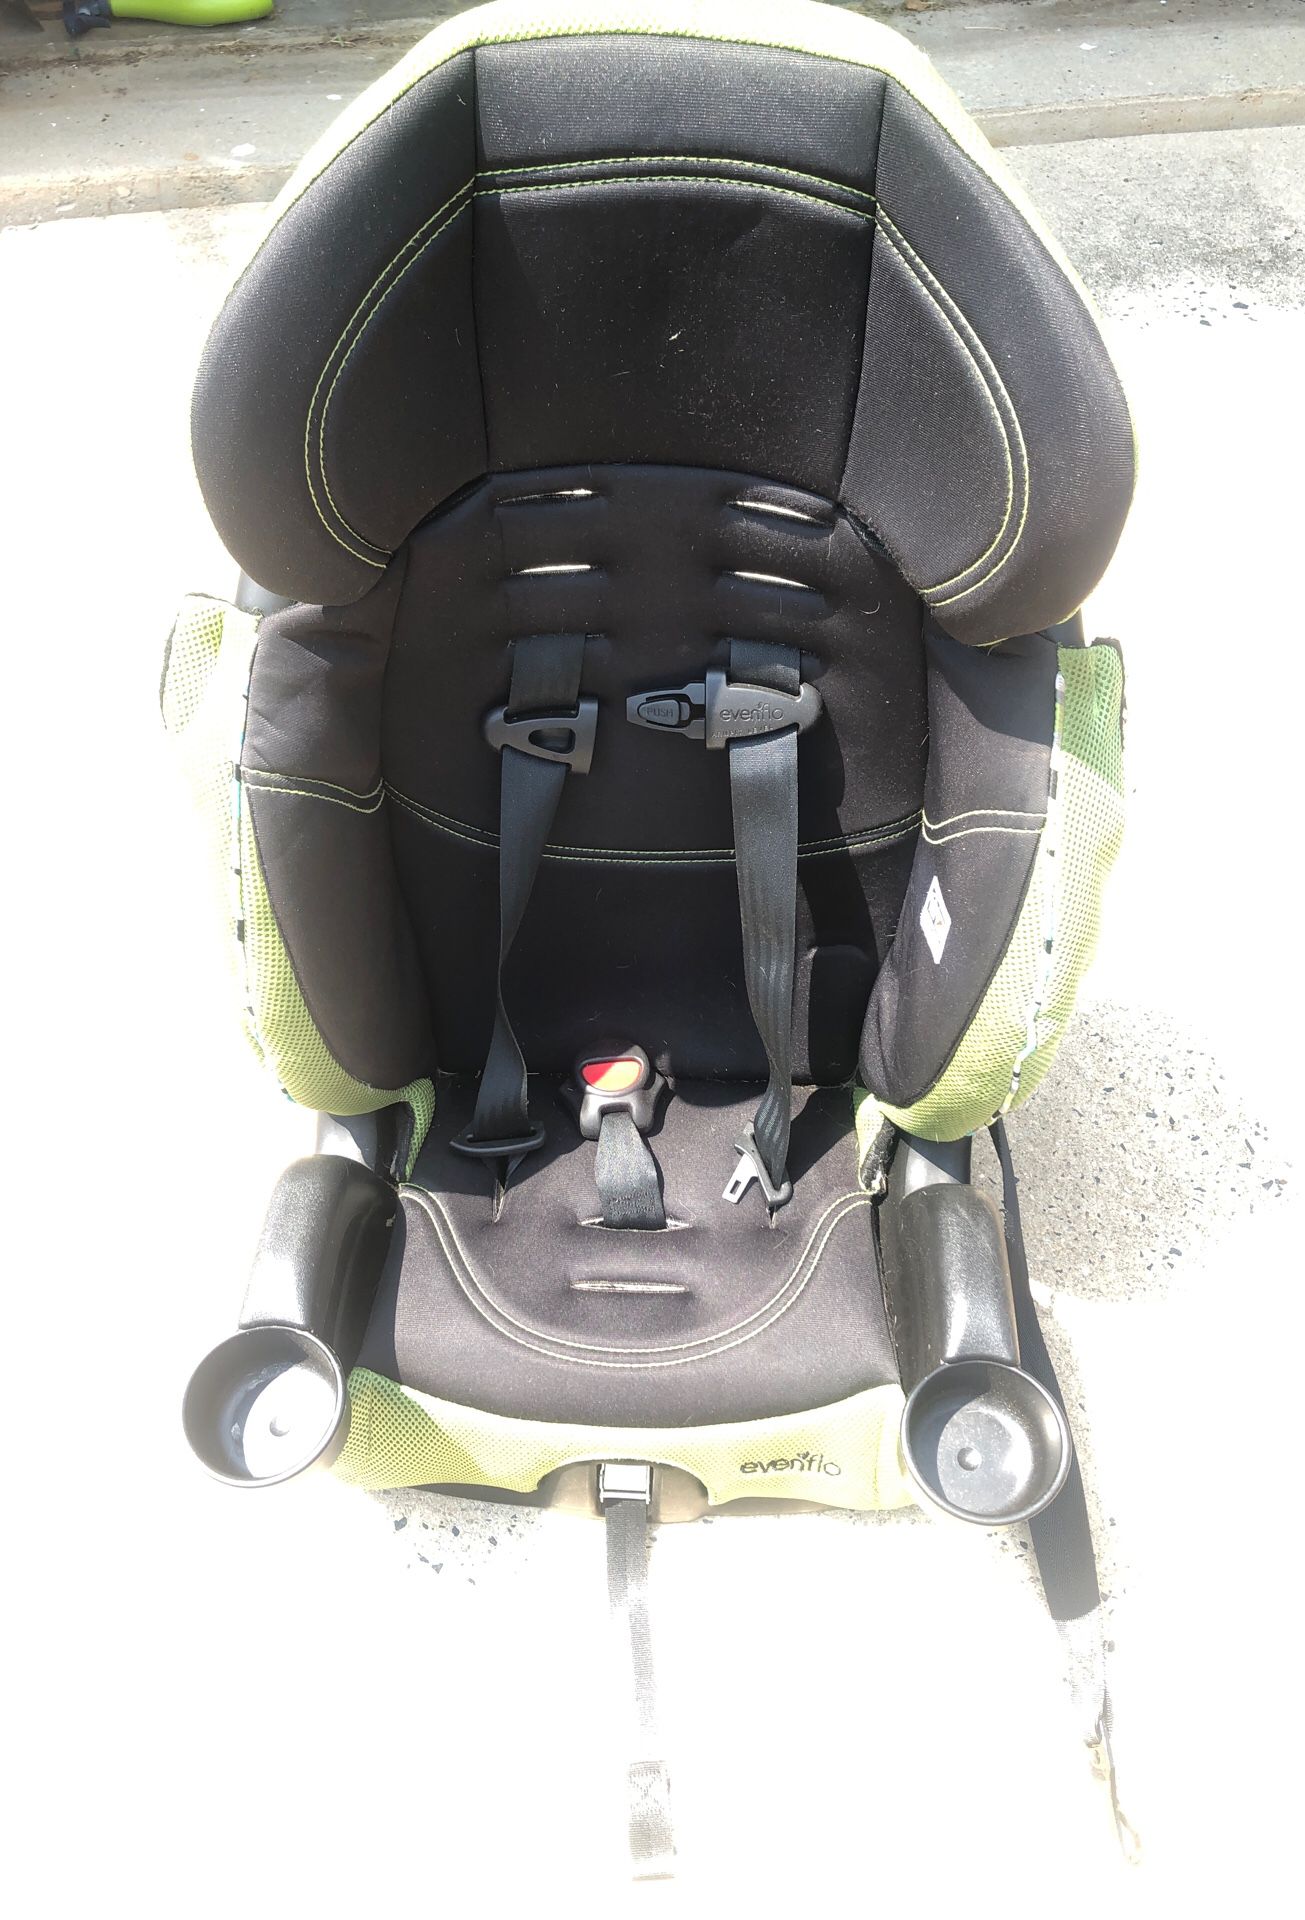 Evenflo Booster car seat